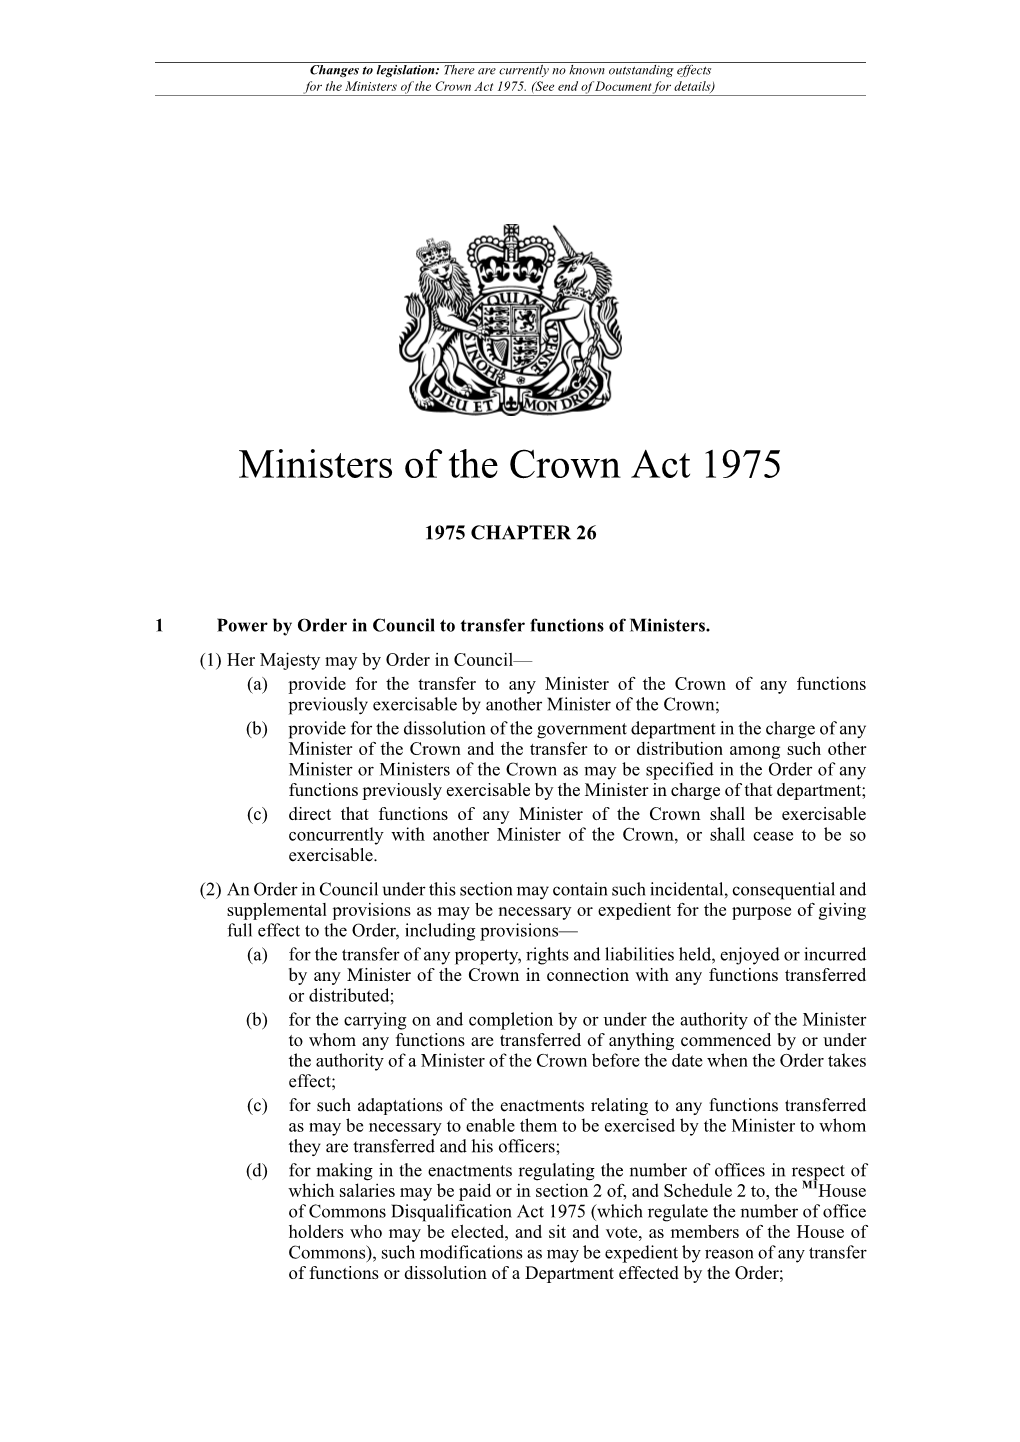 Ministers of the Crown Act 1975